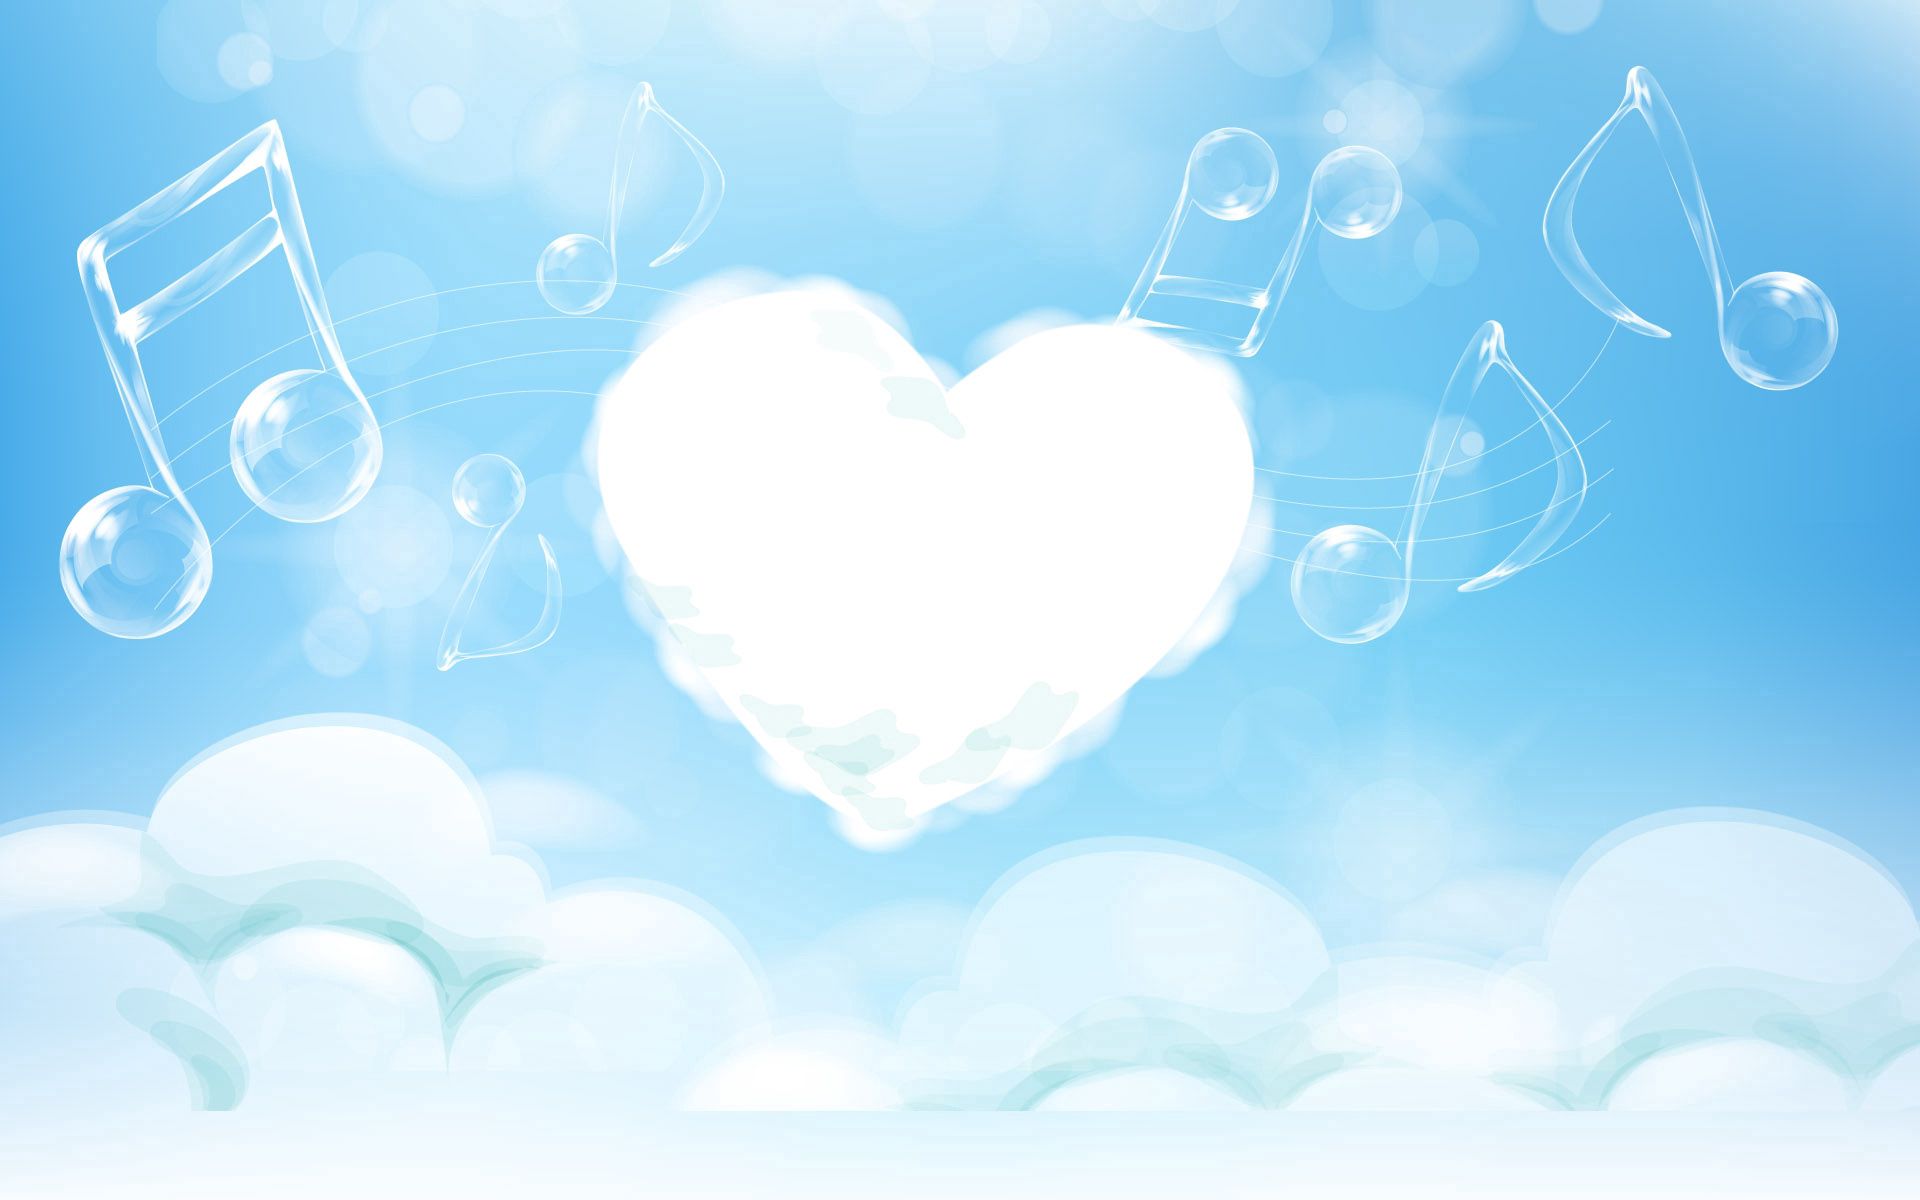 Download background music, abstract, light, light coloured, heart, notes, melody